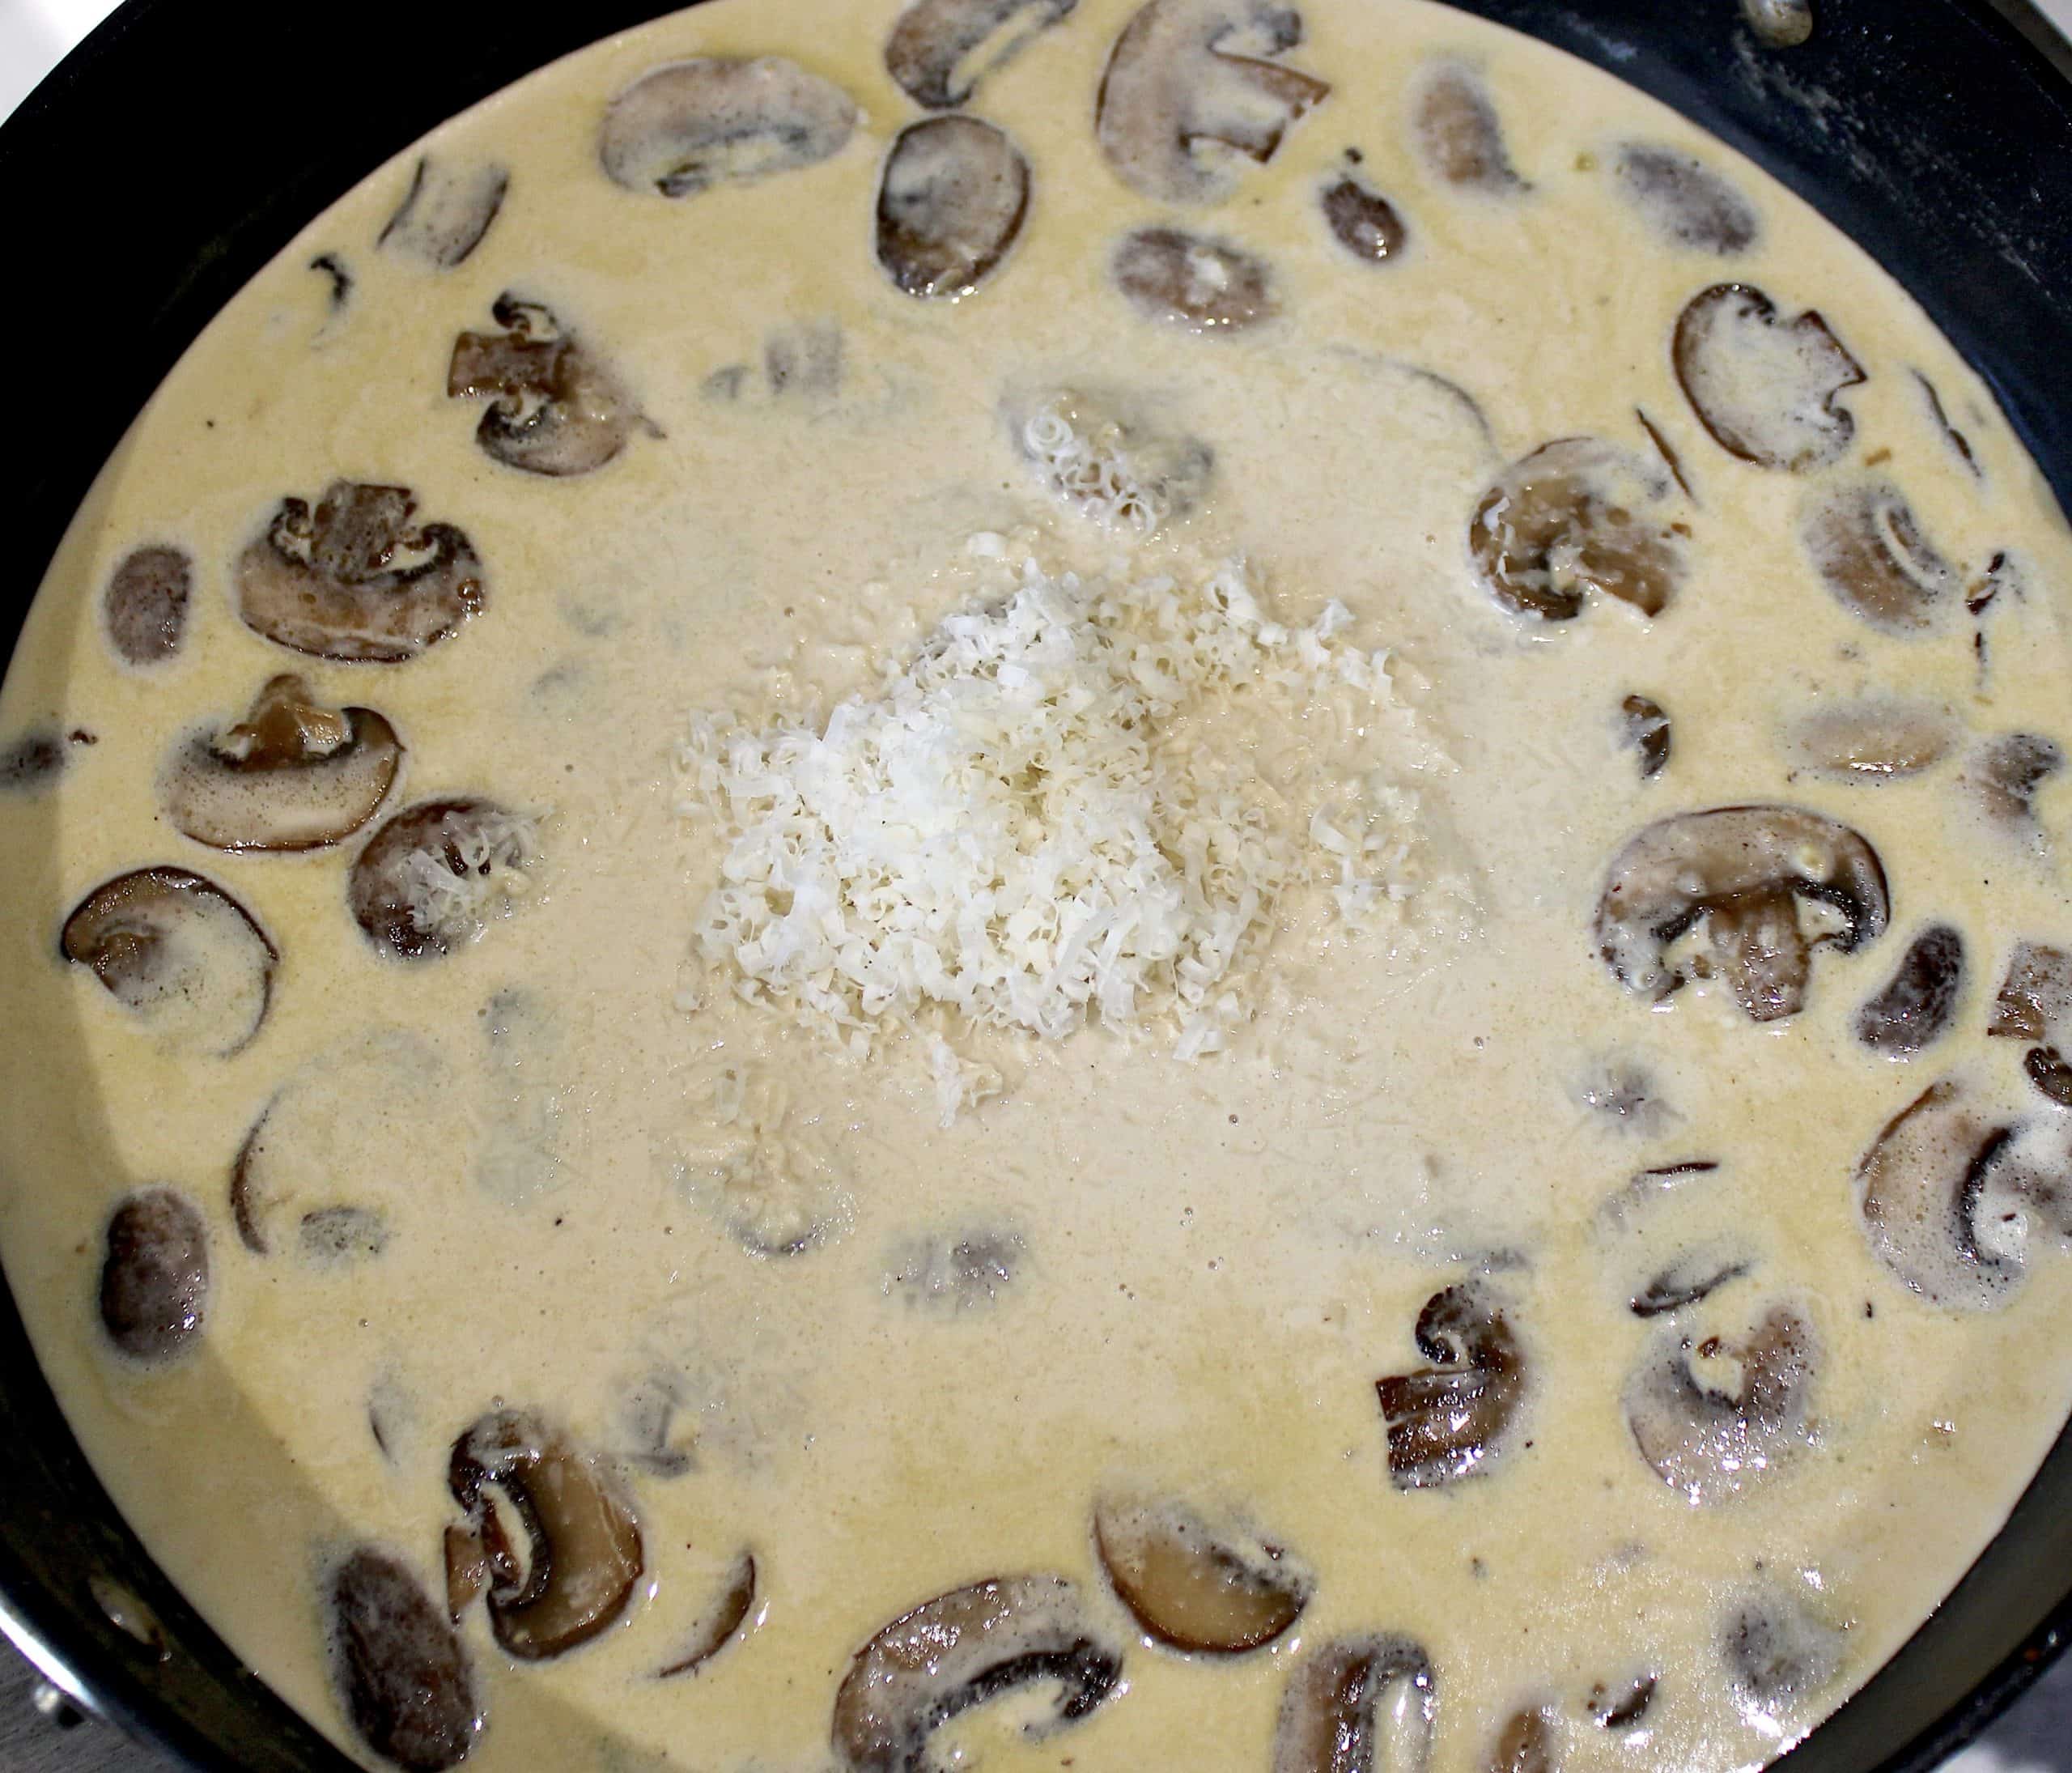 mushrooms in cream sauce with grated parmesan cheese in center